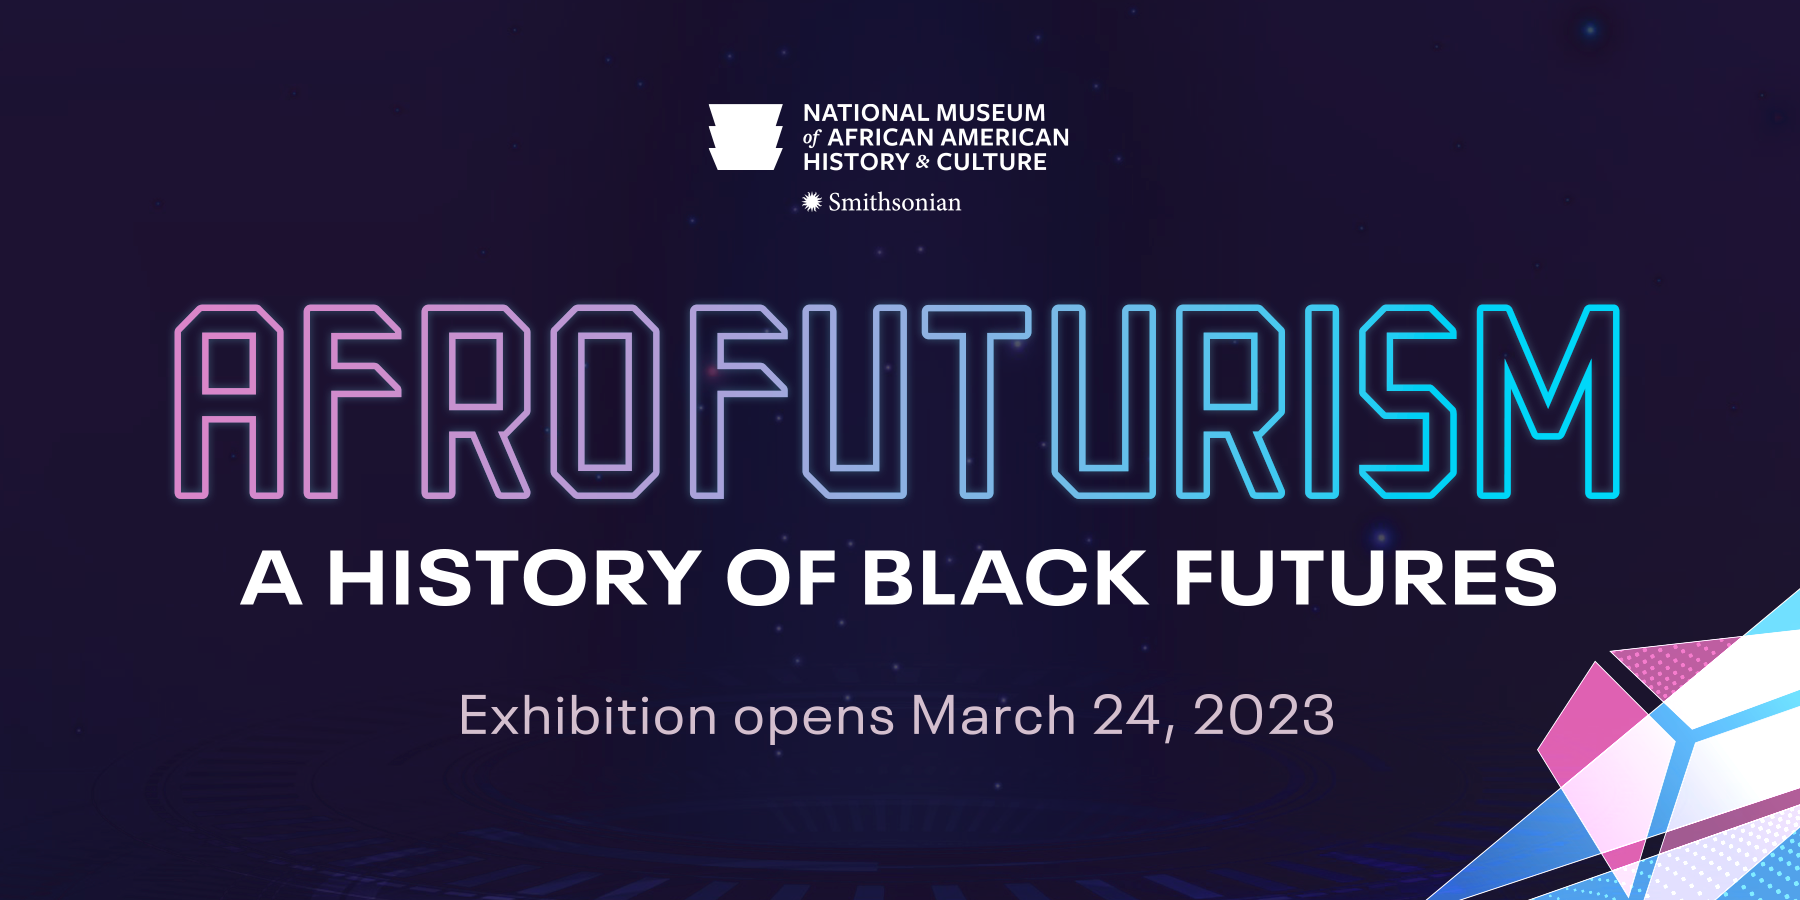 Purple graphic with text: Afrofuturism, A History of Black Futures